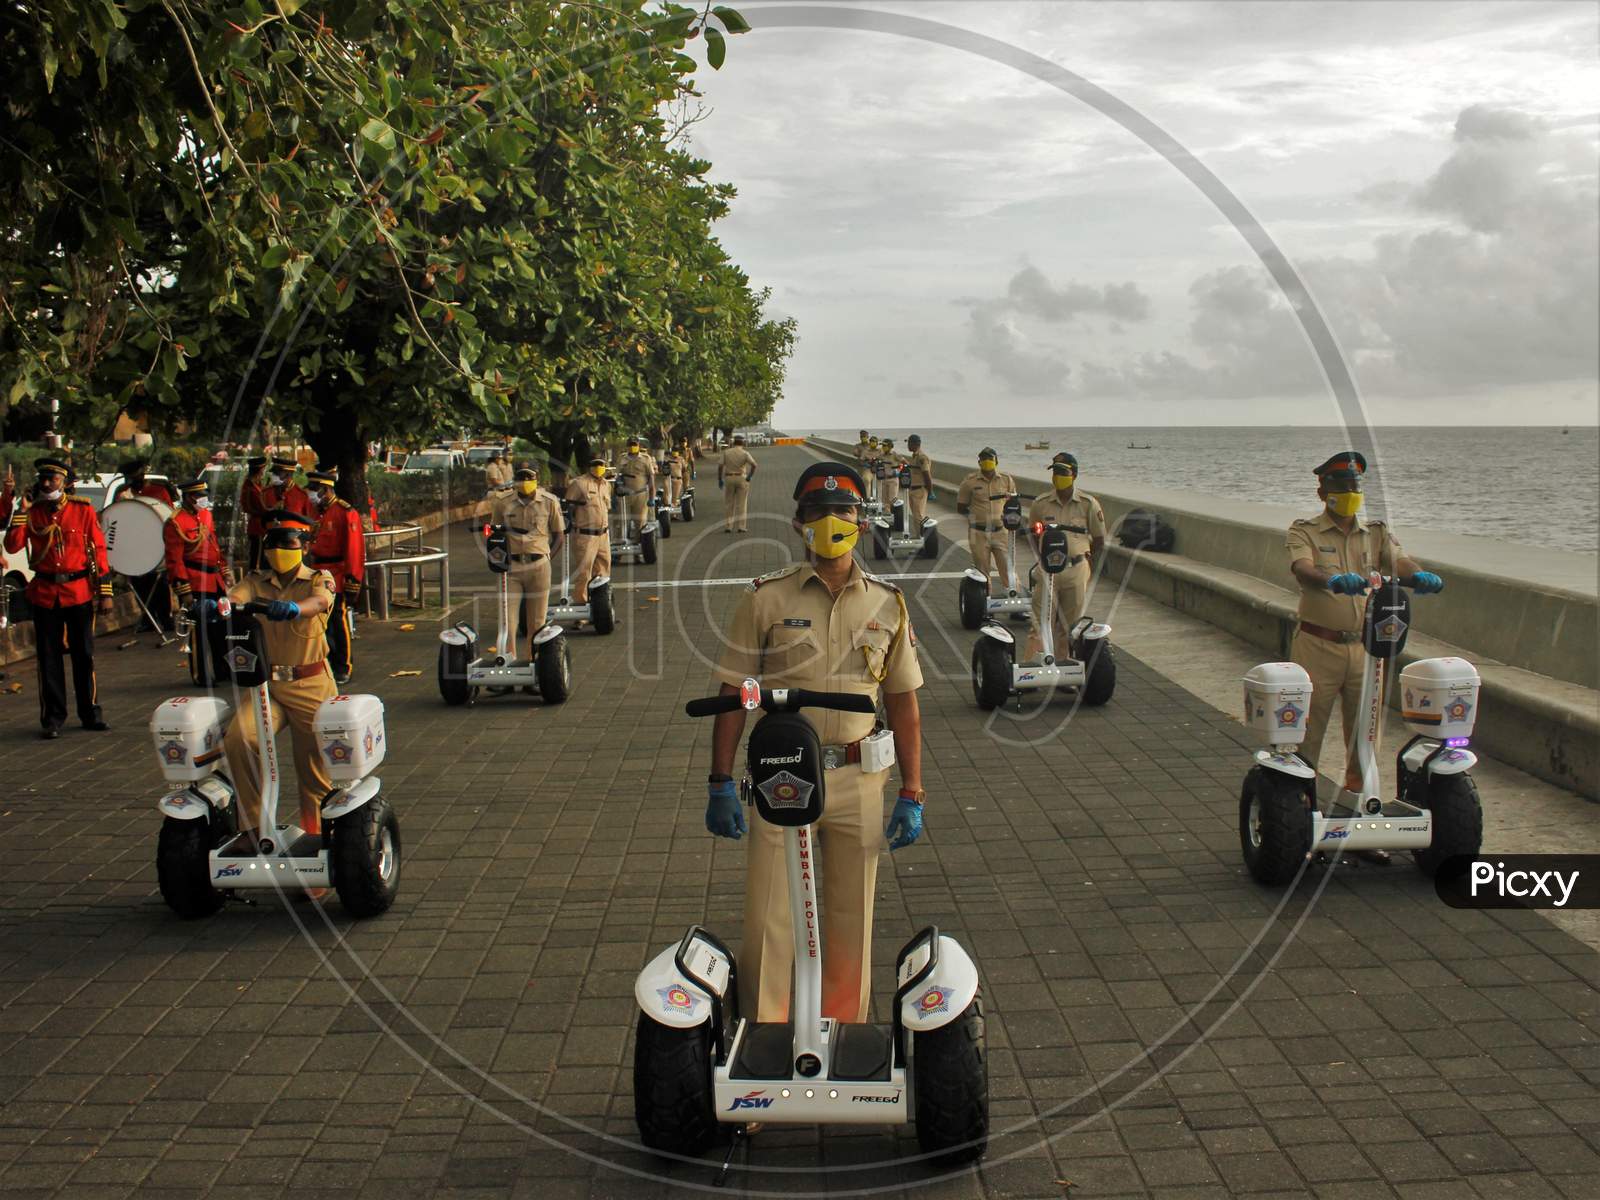 Mumbai Police officials ride Segways at the launch of ‘FREEGO self balancing scooter/Segway electric scooter’ for police patrolling on sea facing promenades in Mumbai, India on June 11, 2020.